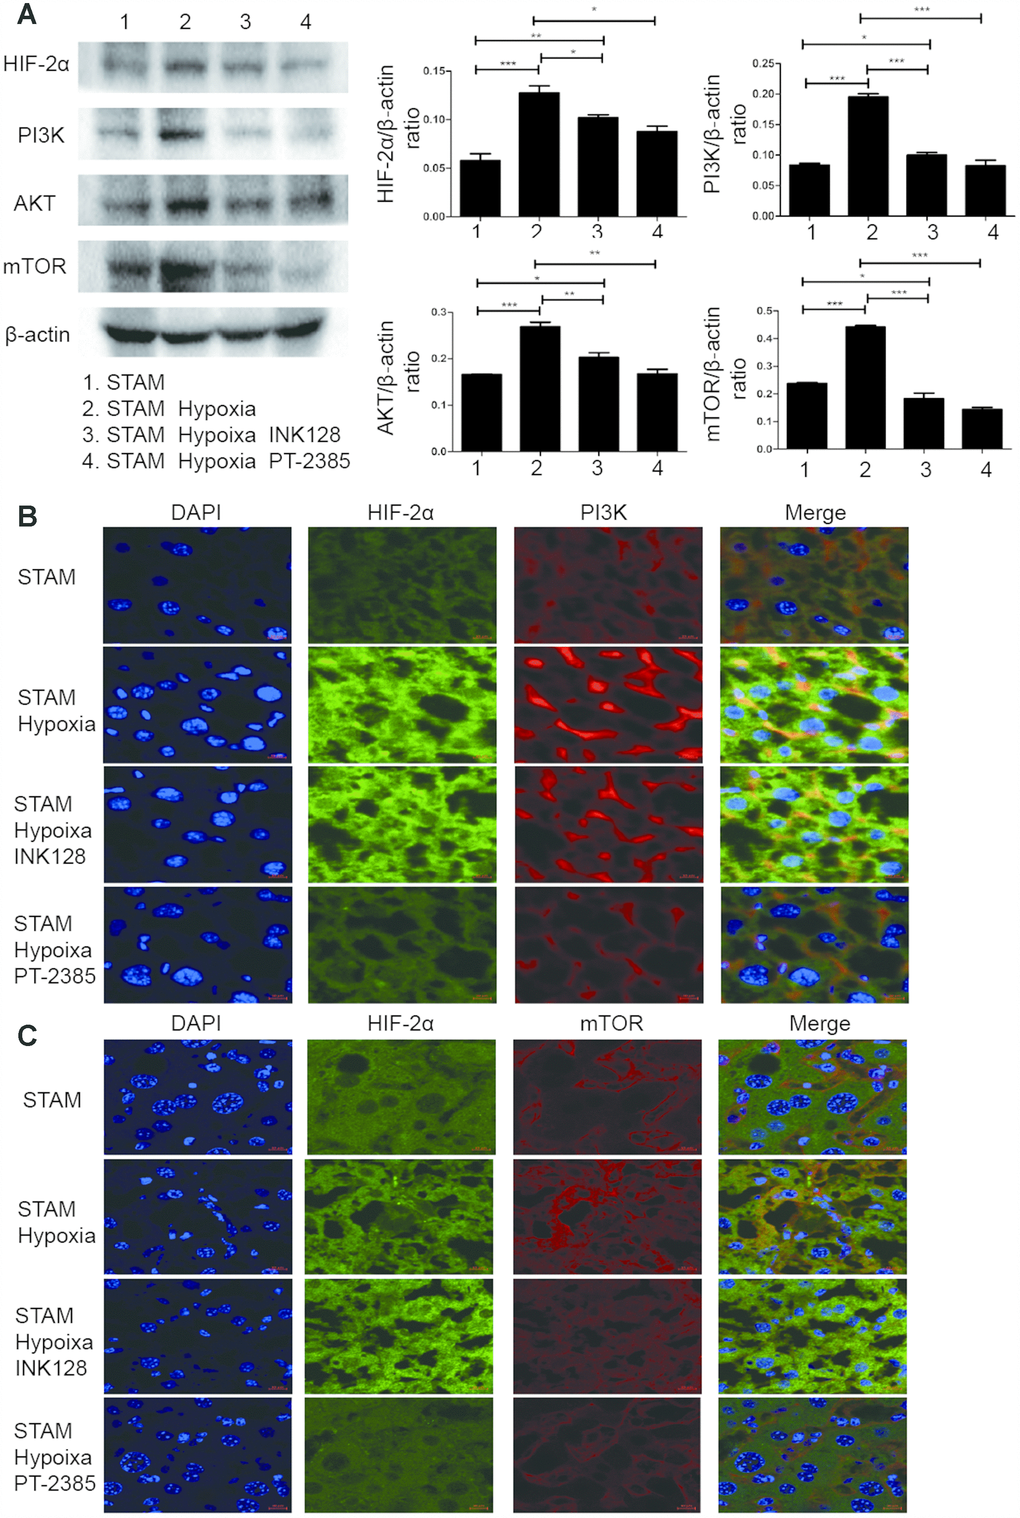 Hypoxia-induced HIF-2α overexpression promotes STAM mouse tumour development via activating the PI3K-AKT-mTOR signalling axis. (A) Western blot analysis of HIF-2α expression and expression of PI3K-mTOR pathway factors in STAM mice of different groups. β-Actin was used as the loading control. Densitometric analyses of the band intensity ratios for HIF-2α/β-actin, PI3K/β-actin and mTOR/β-actin. (B, C) The liver sections were stained with DAPI to visualise nuclei (blue), Alexa Fluor 488 to visualise the distribution of HIF-2α (green) and Alexa Fluor 568 to PI3K/mTOR (red) proteins. Scale bar: 10 μm.